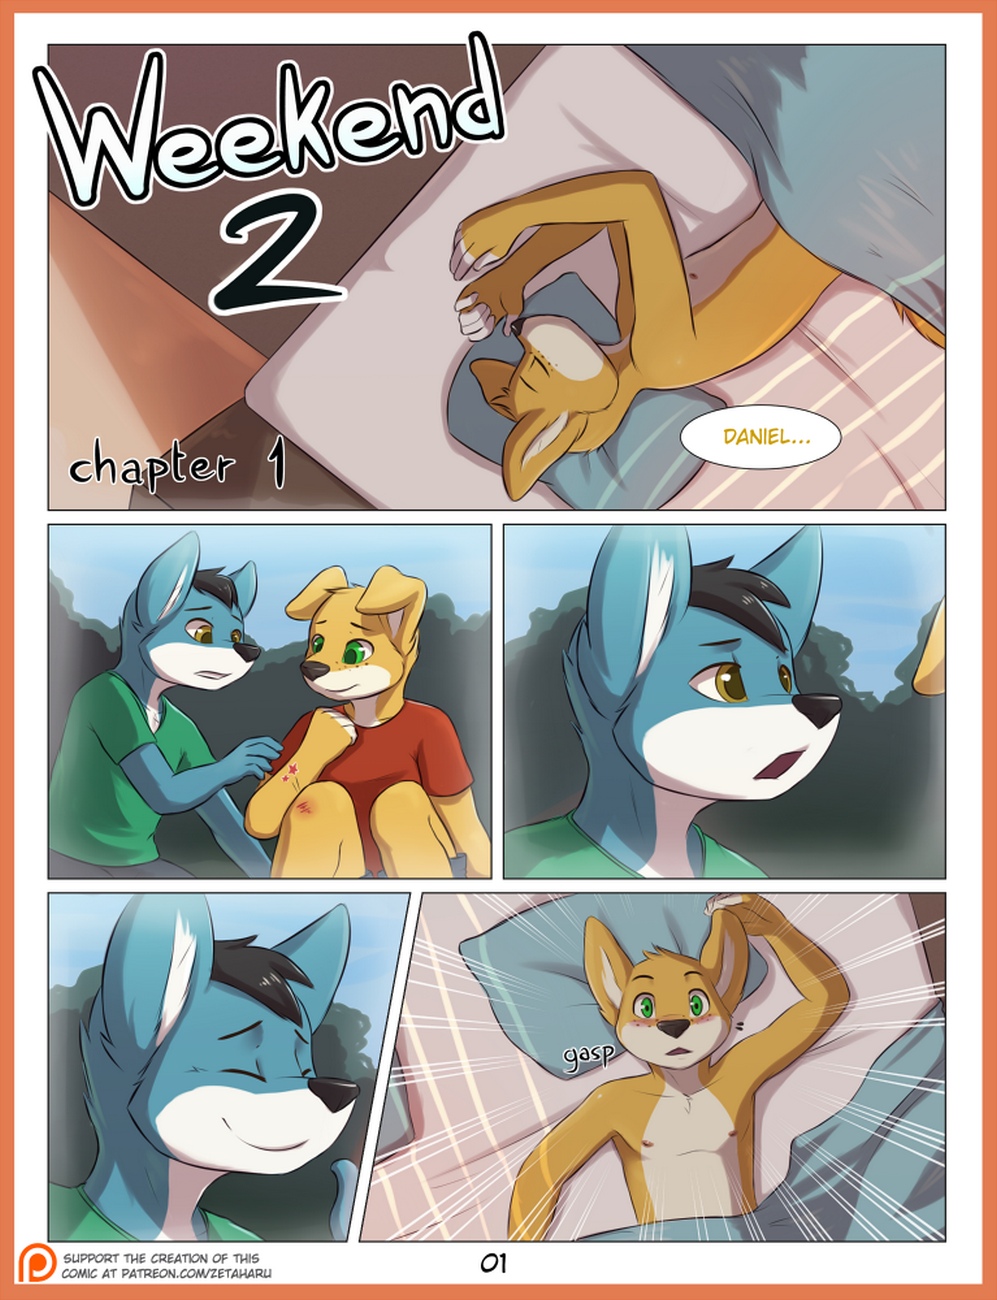 The weekend 2 gay furry porn comic